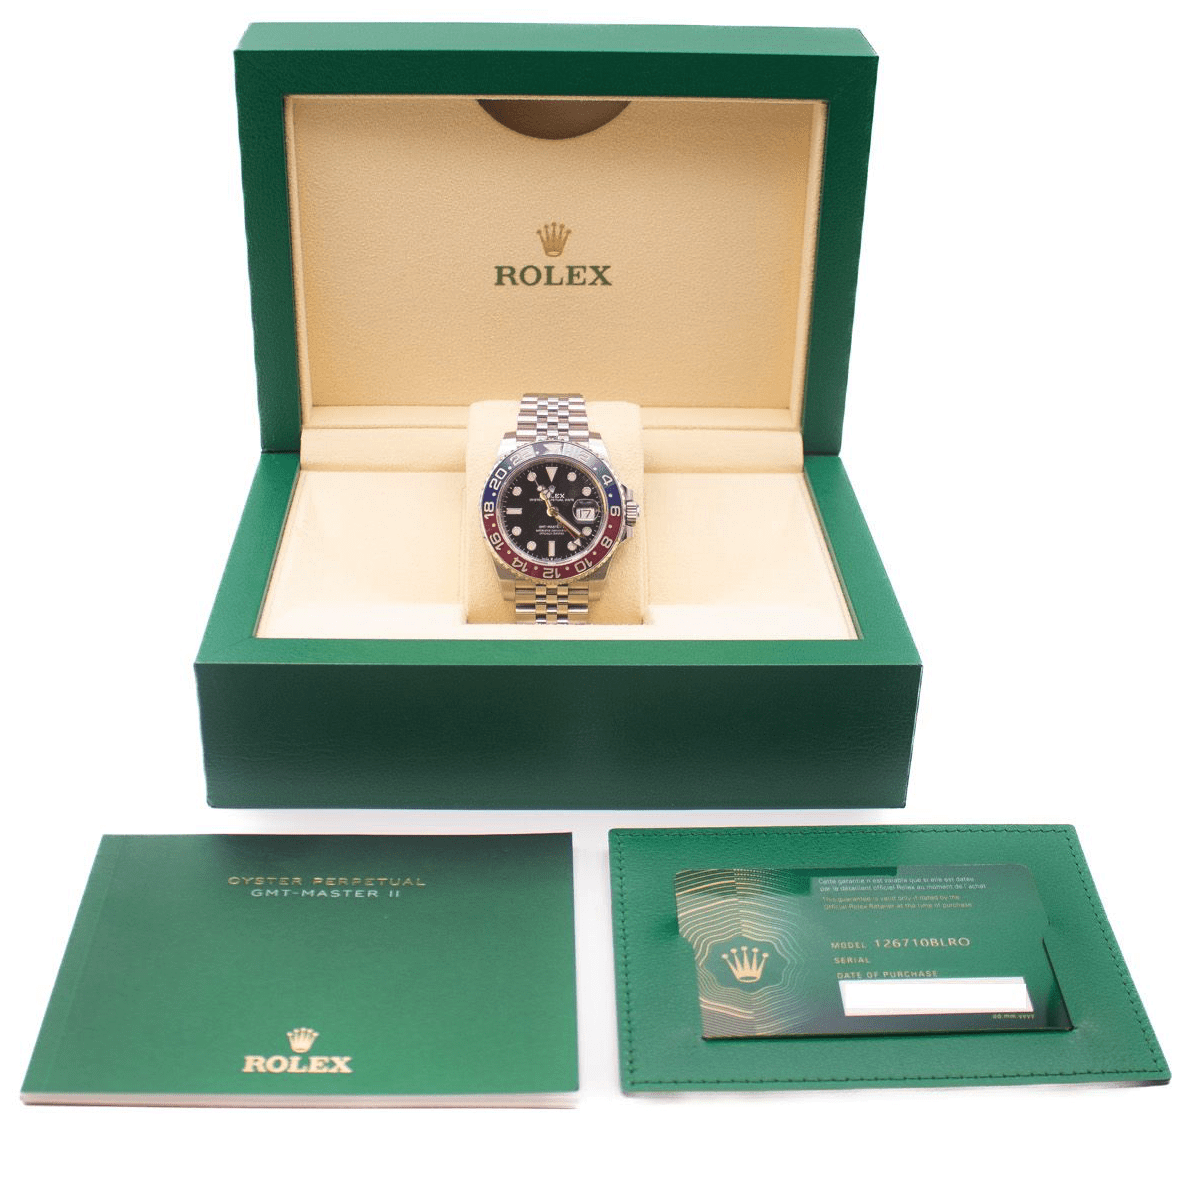 Rolex GMT Master 11 watch in box with certificates